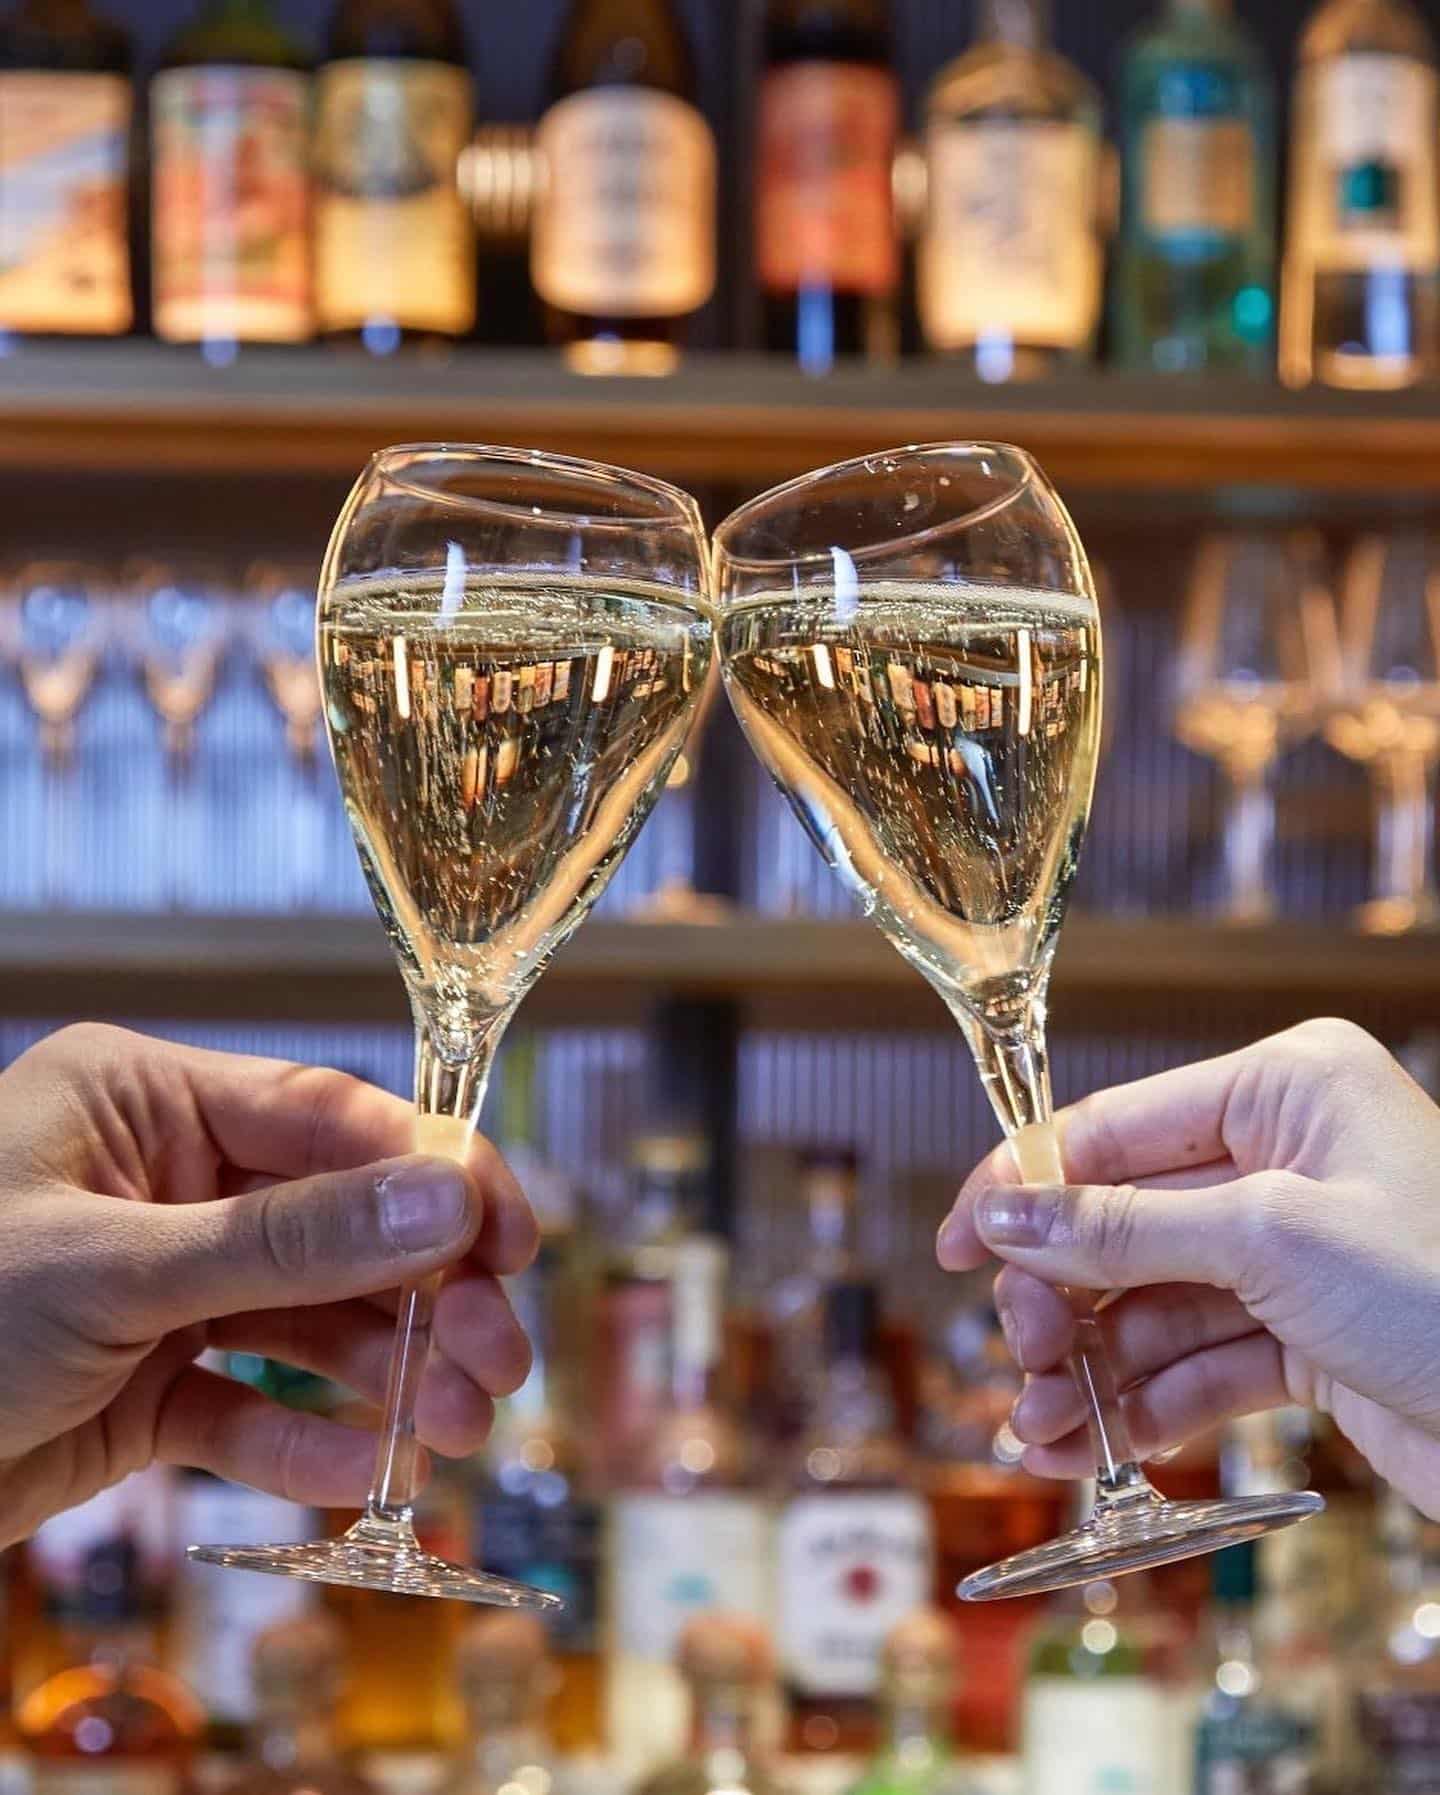 Sparkles. Dancing. Prix fixe menus. A toast at midnight. Ring in 2023 in style at the @tinbuilding  

Reservations ➤ link in bio.